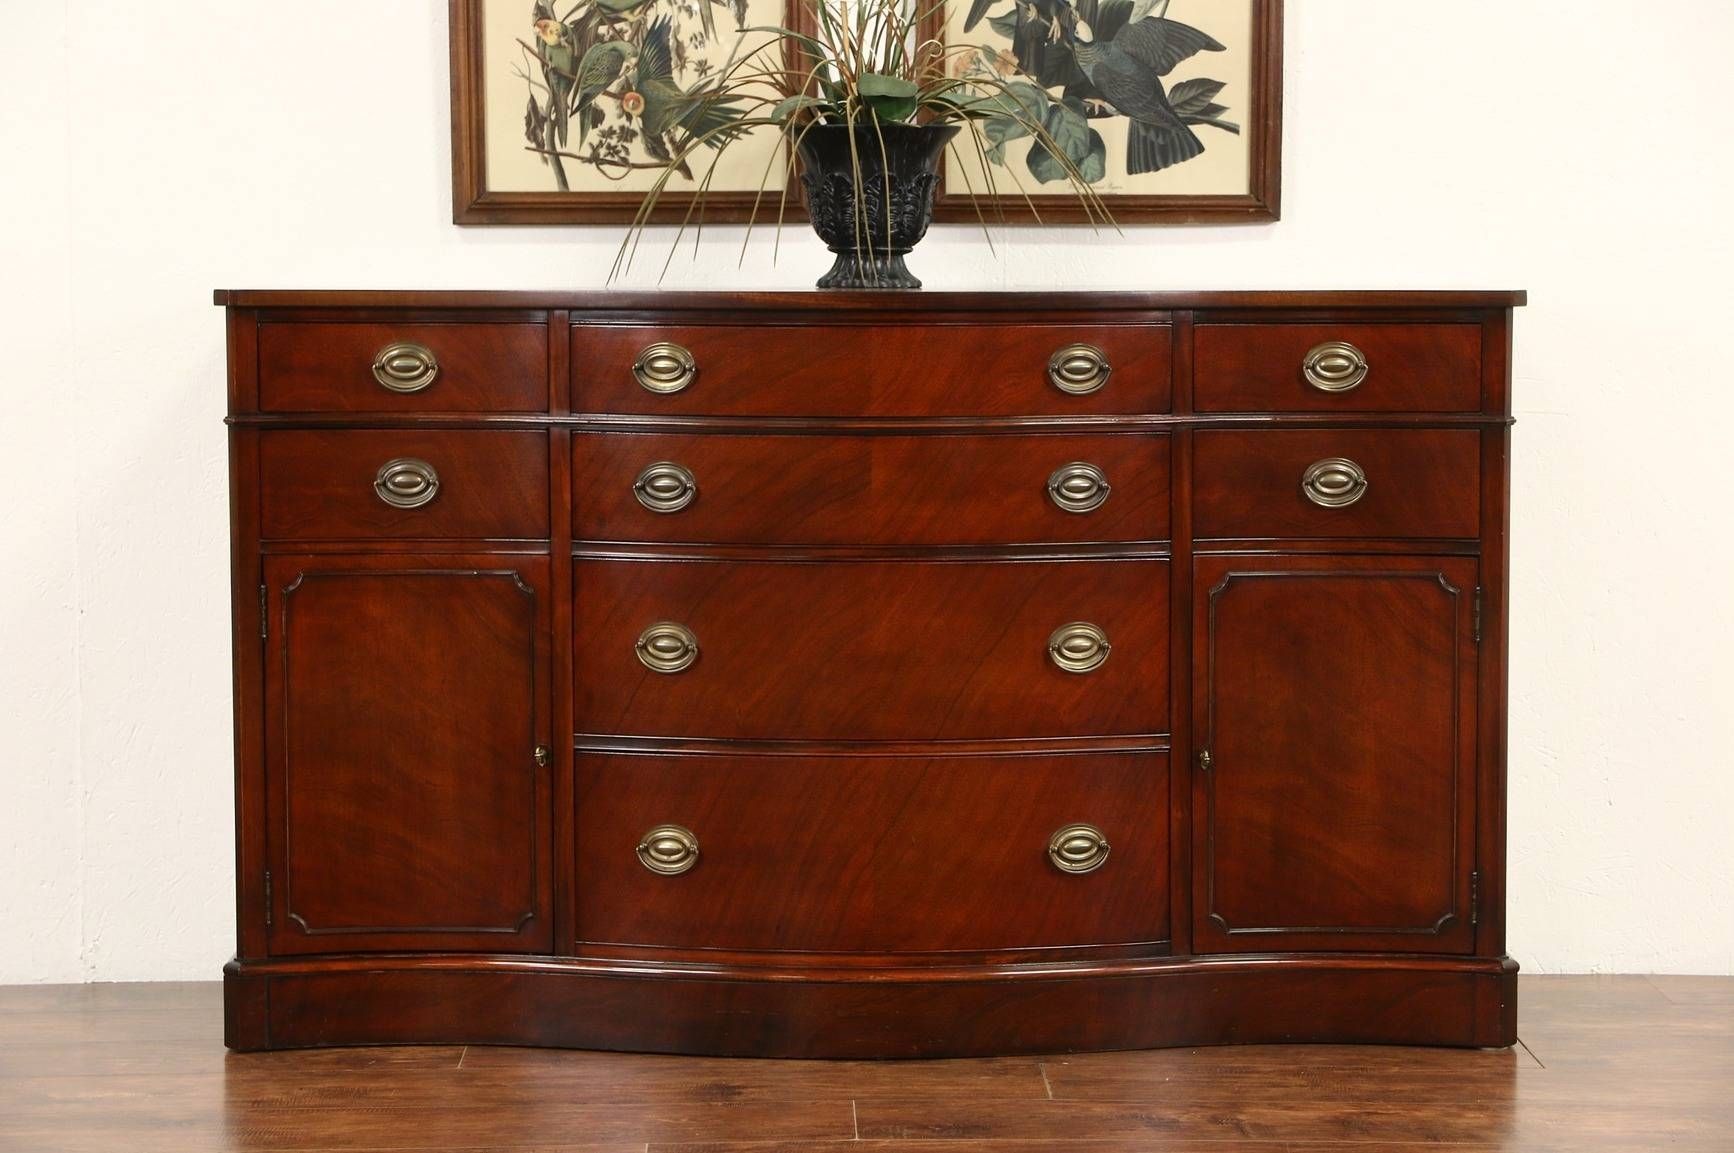 Sold – Drexel Travis Court Mahogany Sideboard, Buffet Or Server Within Mahogany Sideboards Buffets (View 6 of 15)